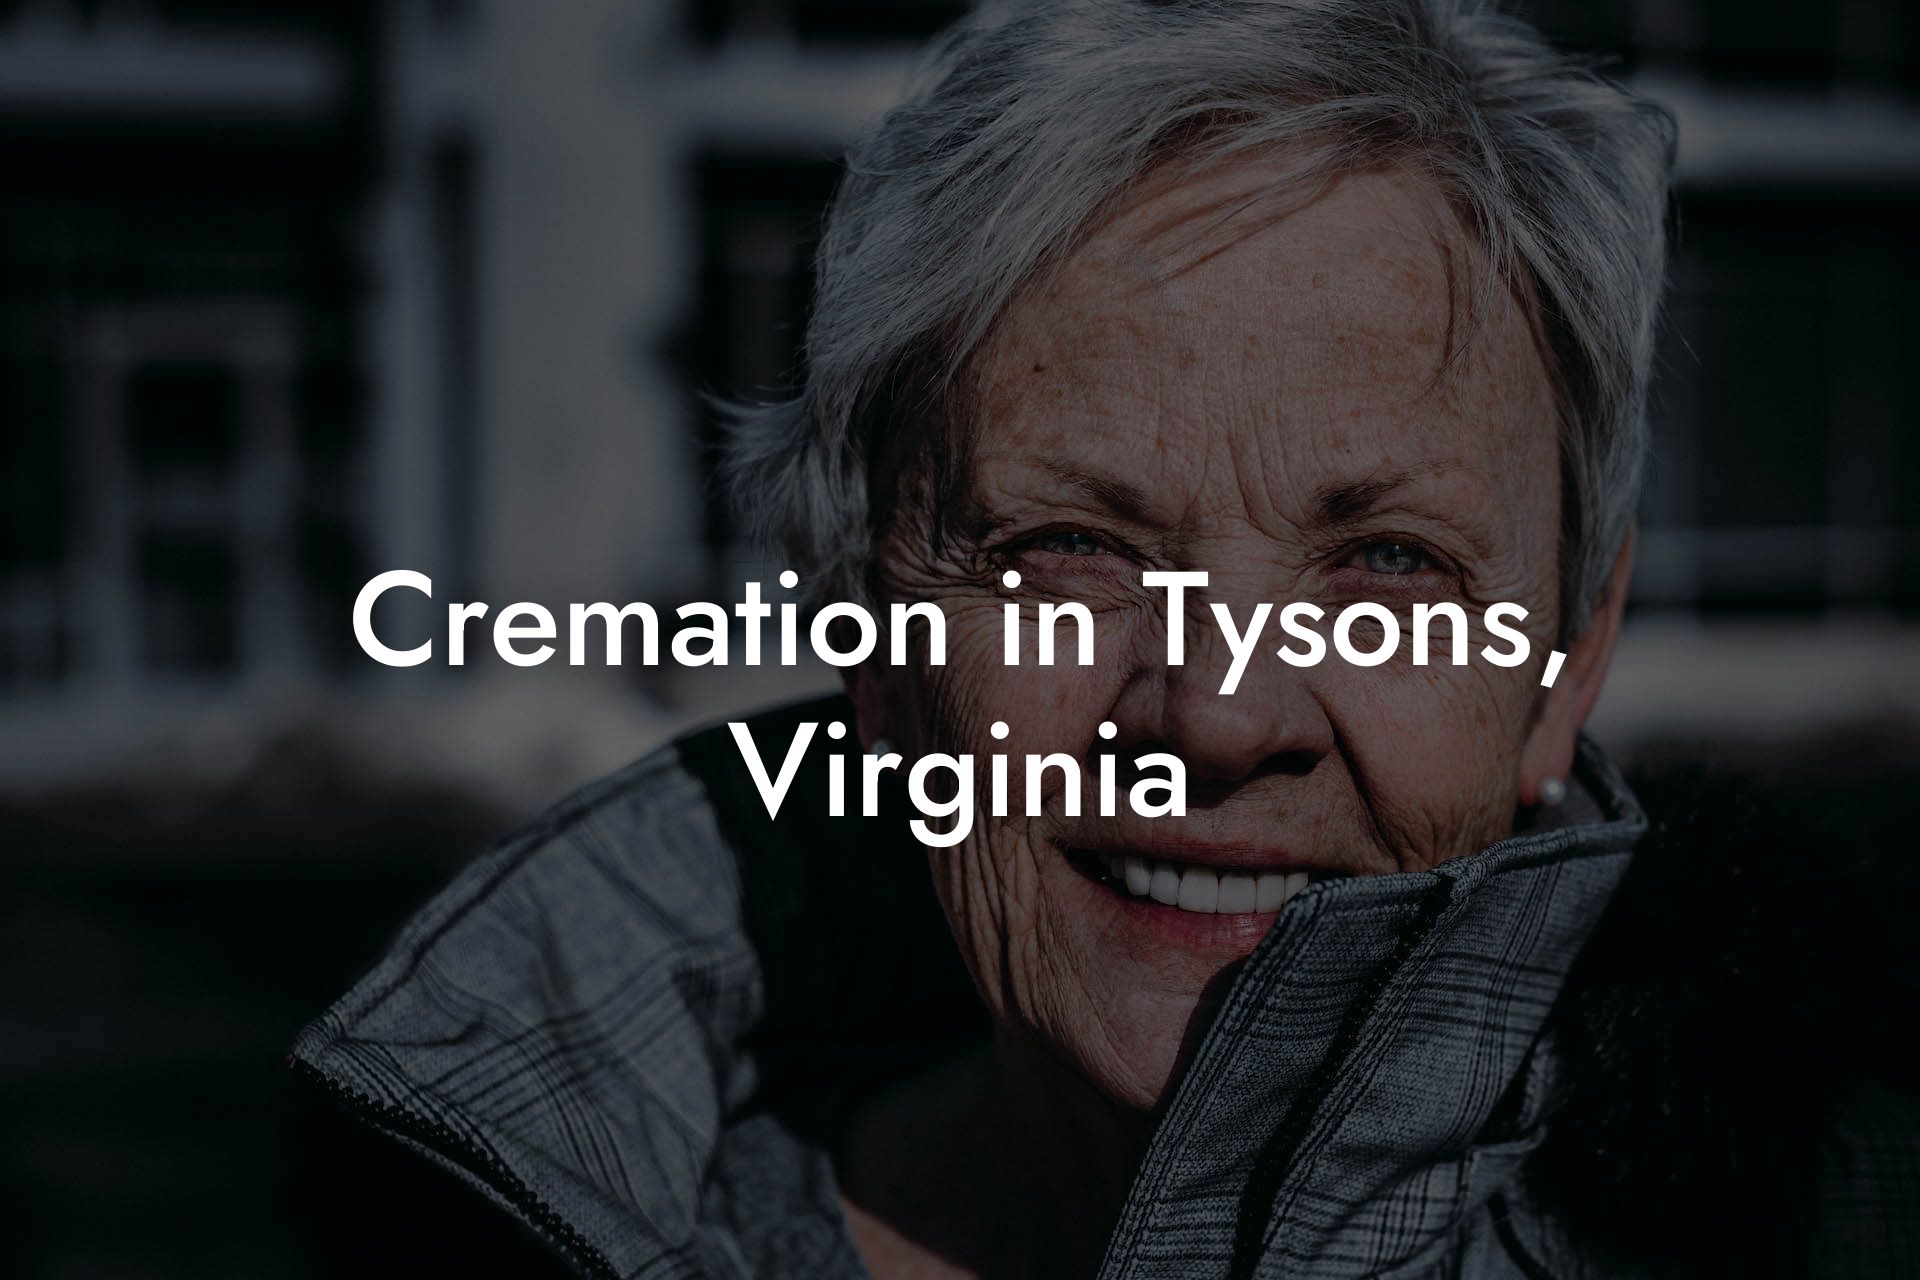 Cremation in Tysons, Virginia